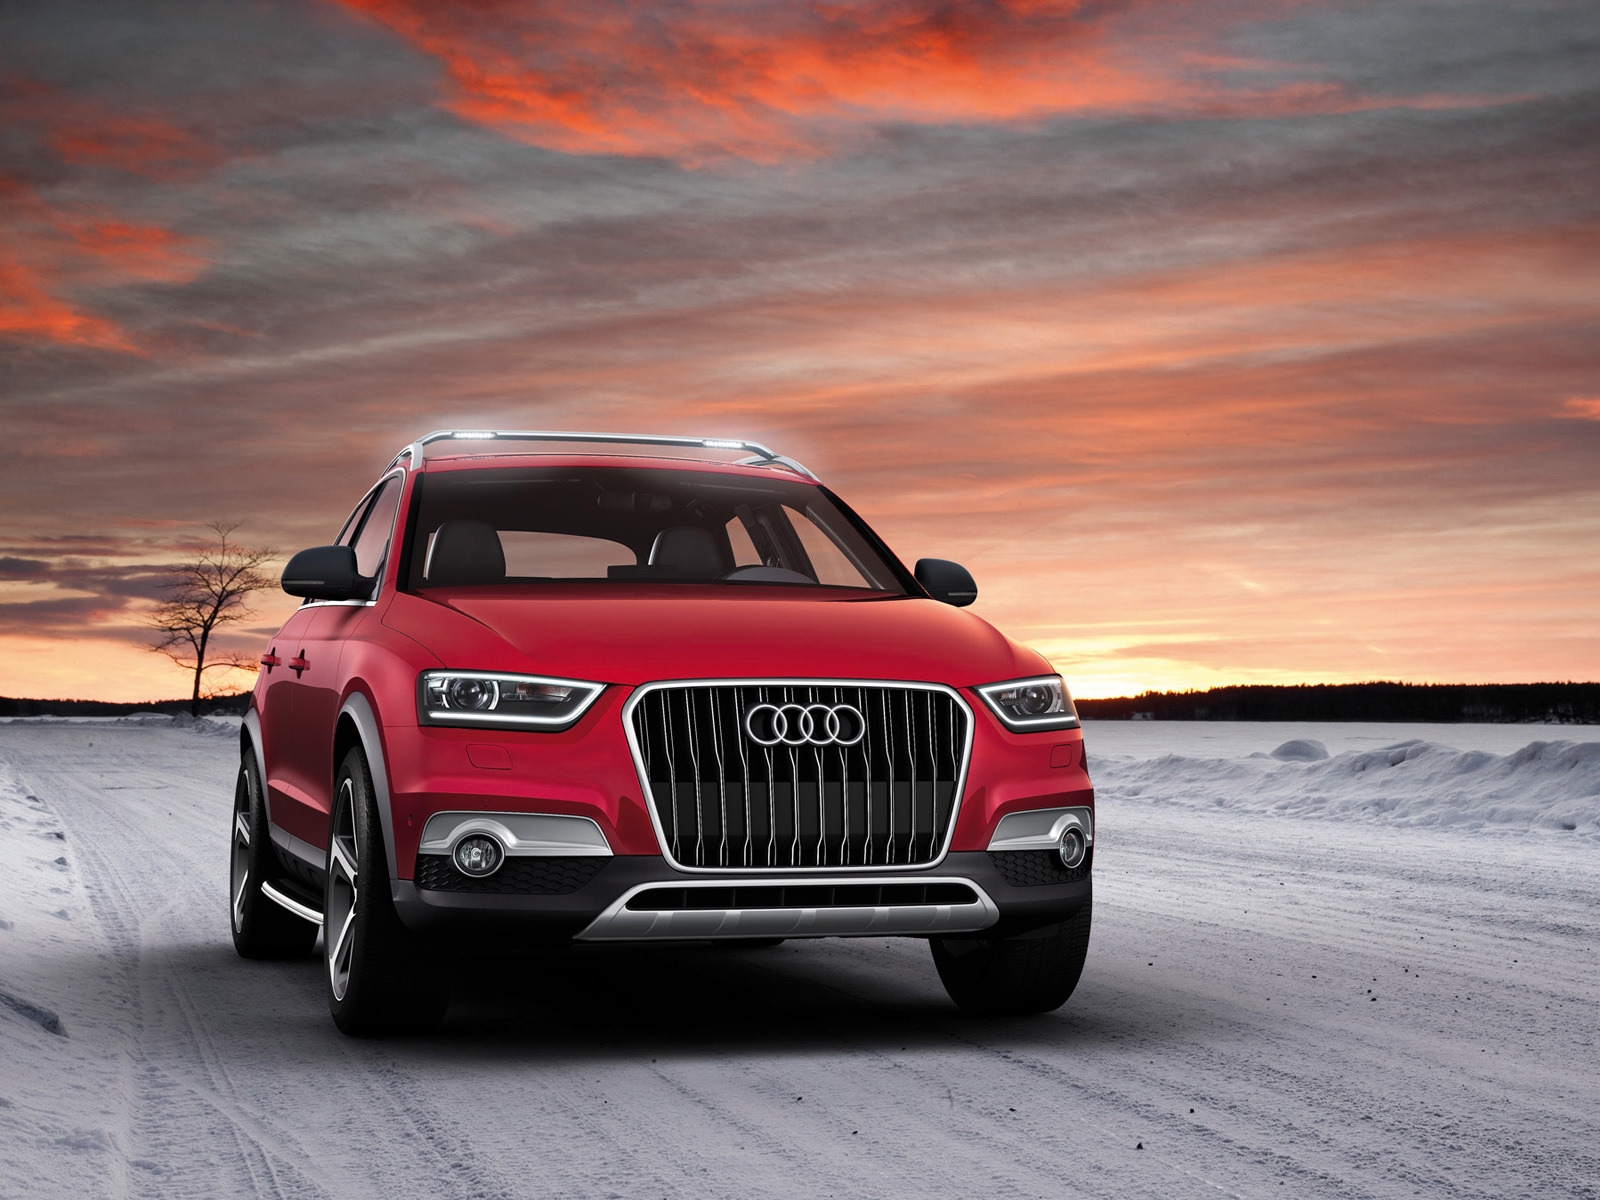 2012 Audi Q3 Vail Front for 1600 x 1200 resolution